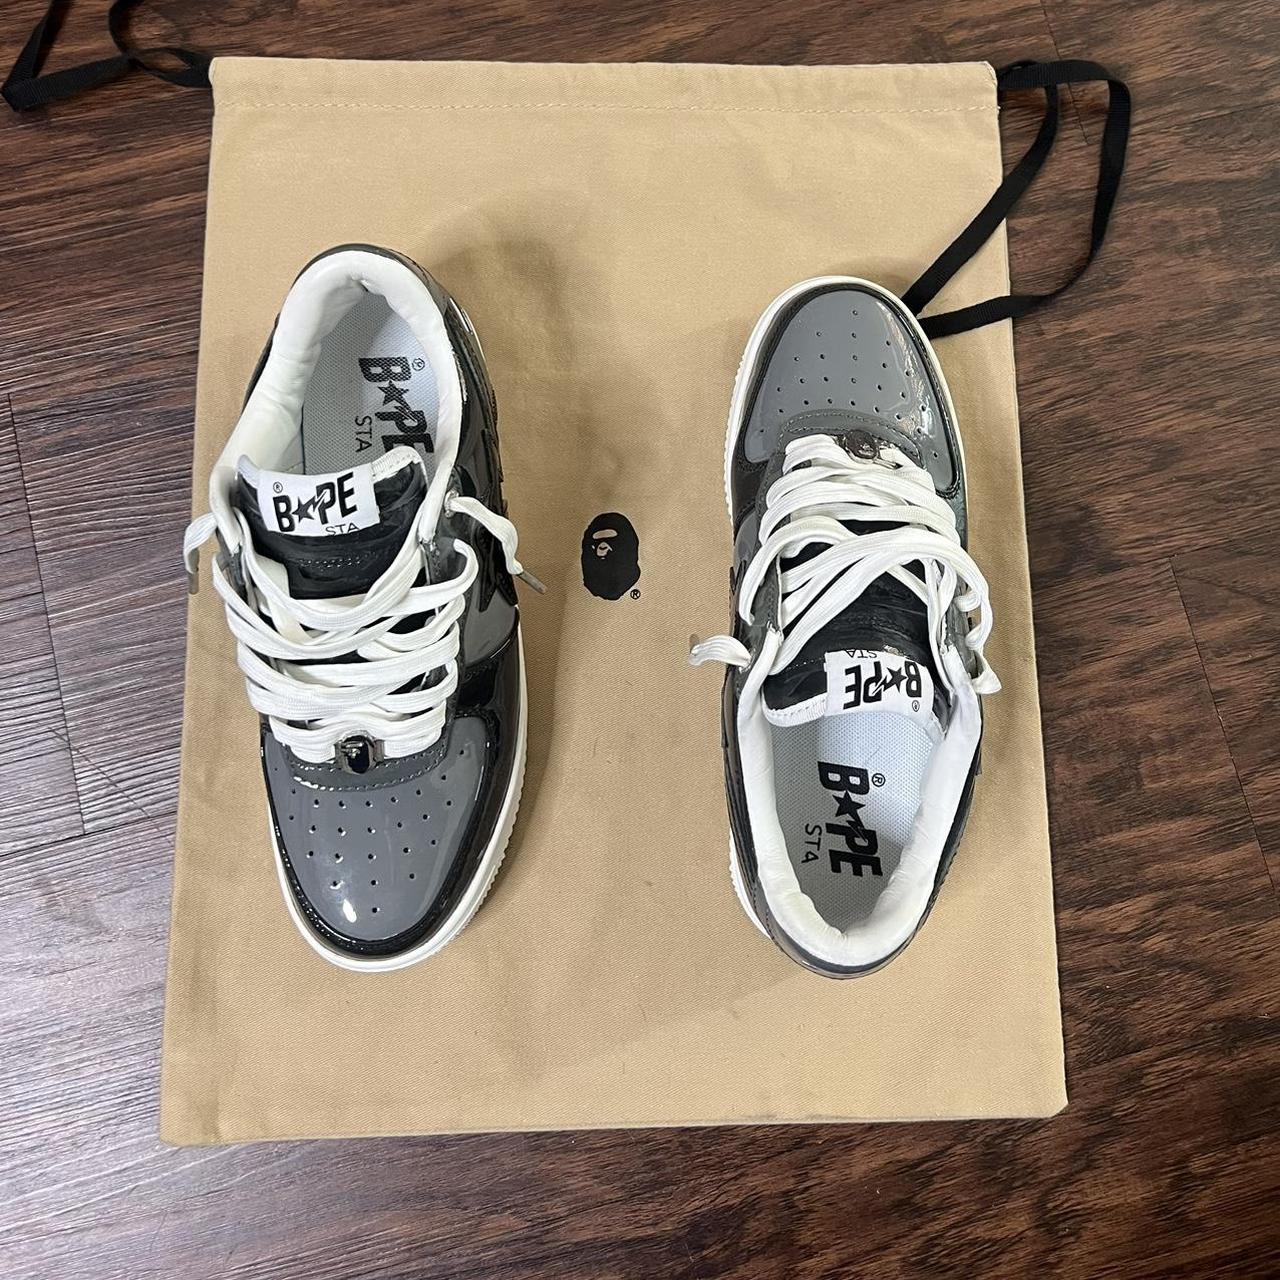 OG Black/Grey Combo Bapestas Sneakers come with the... - Depop